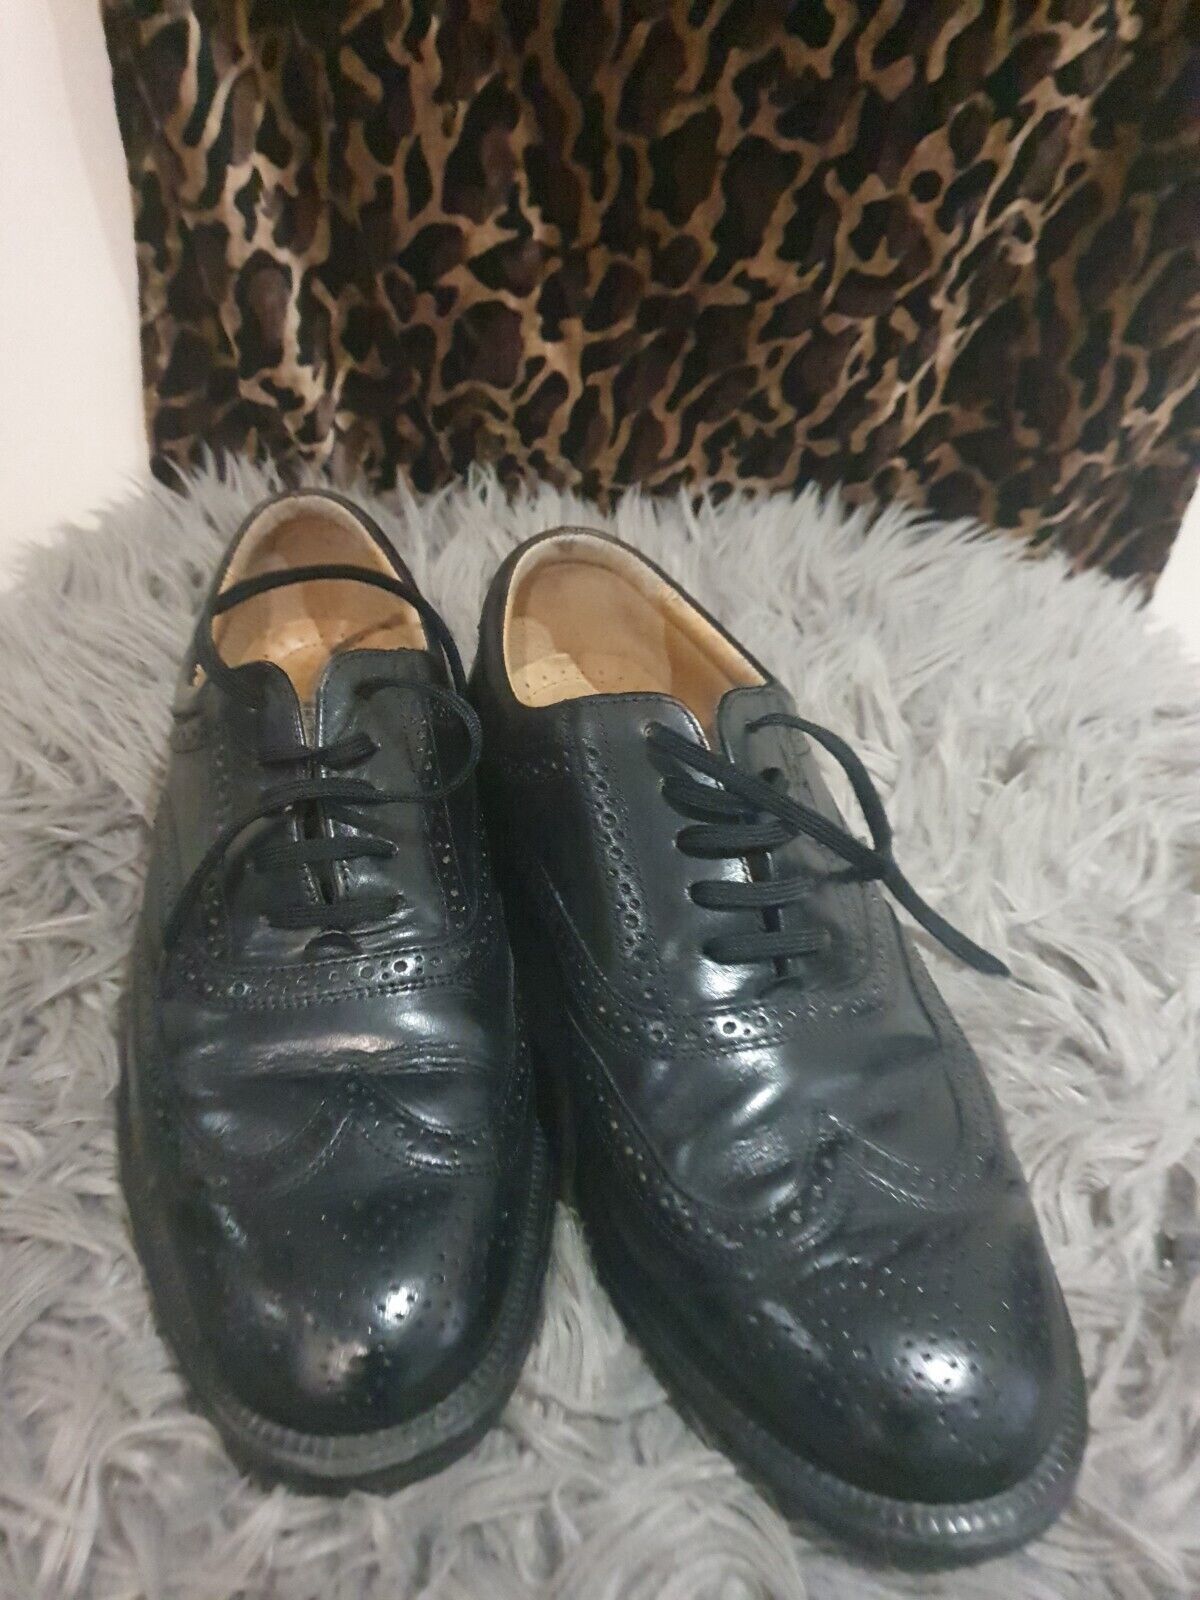 Primary image for mens black shoes size 9 Louis Gianni